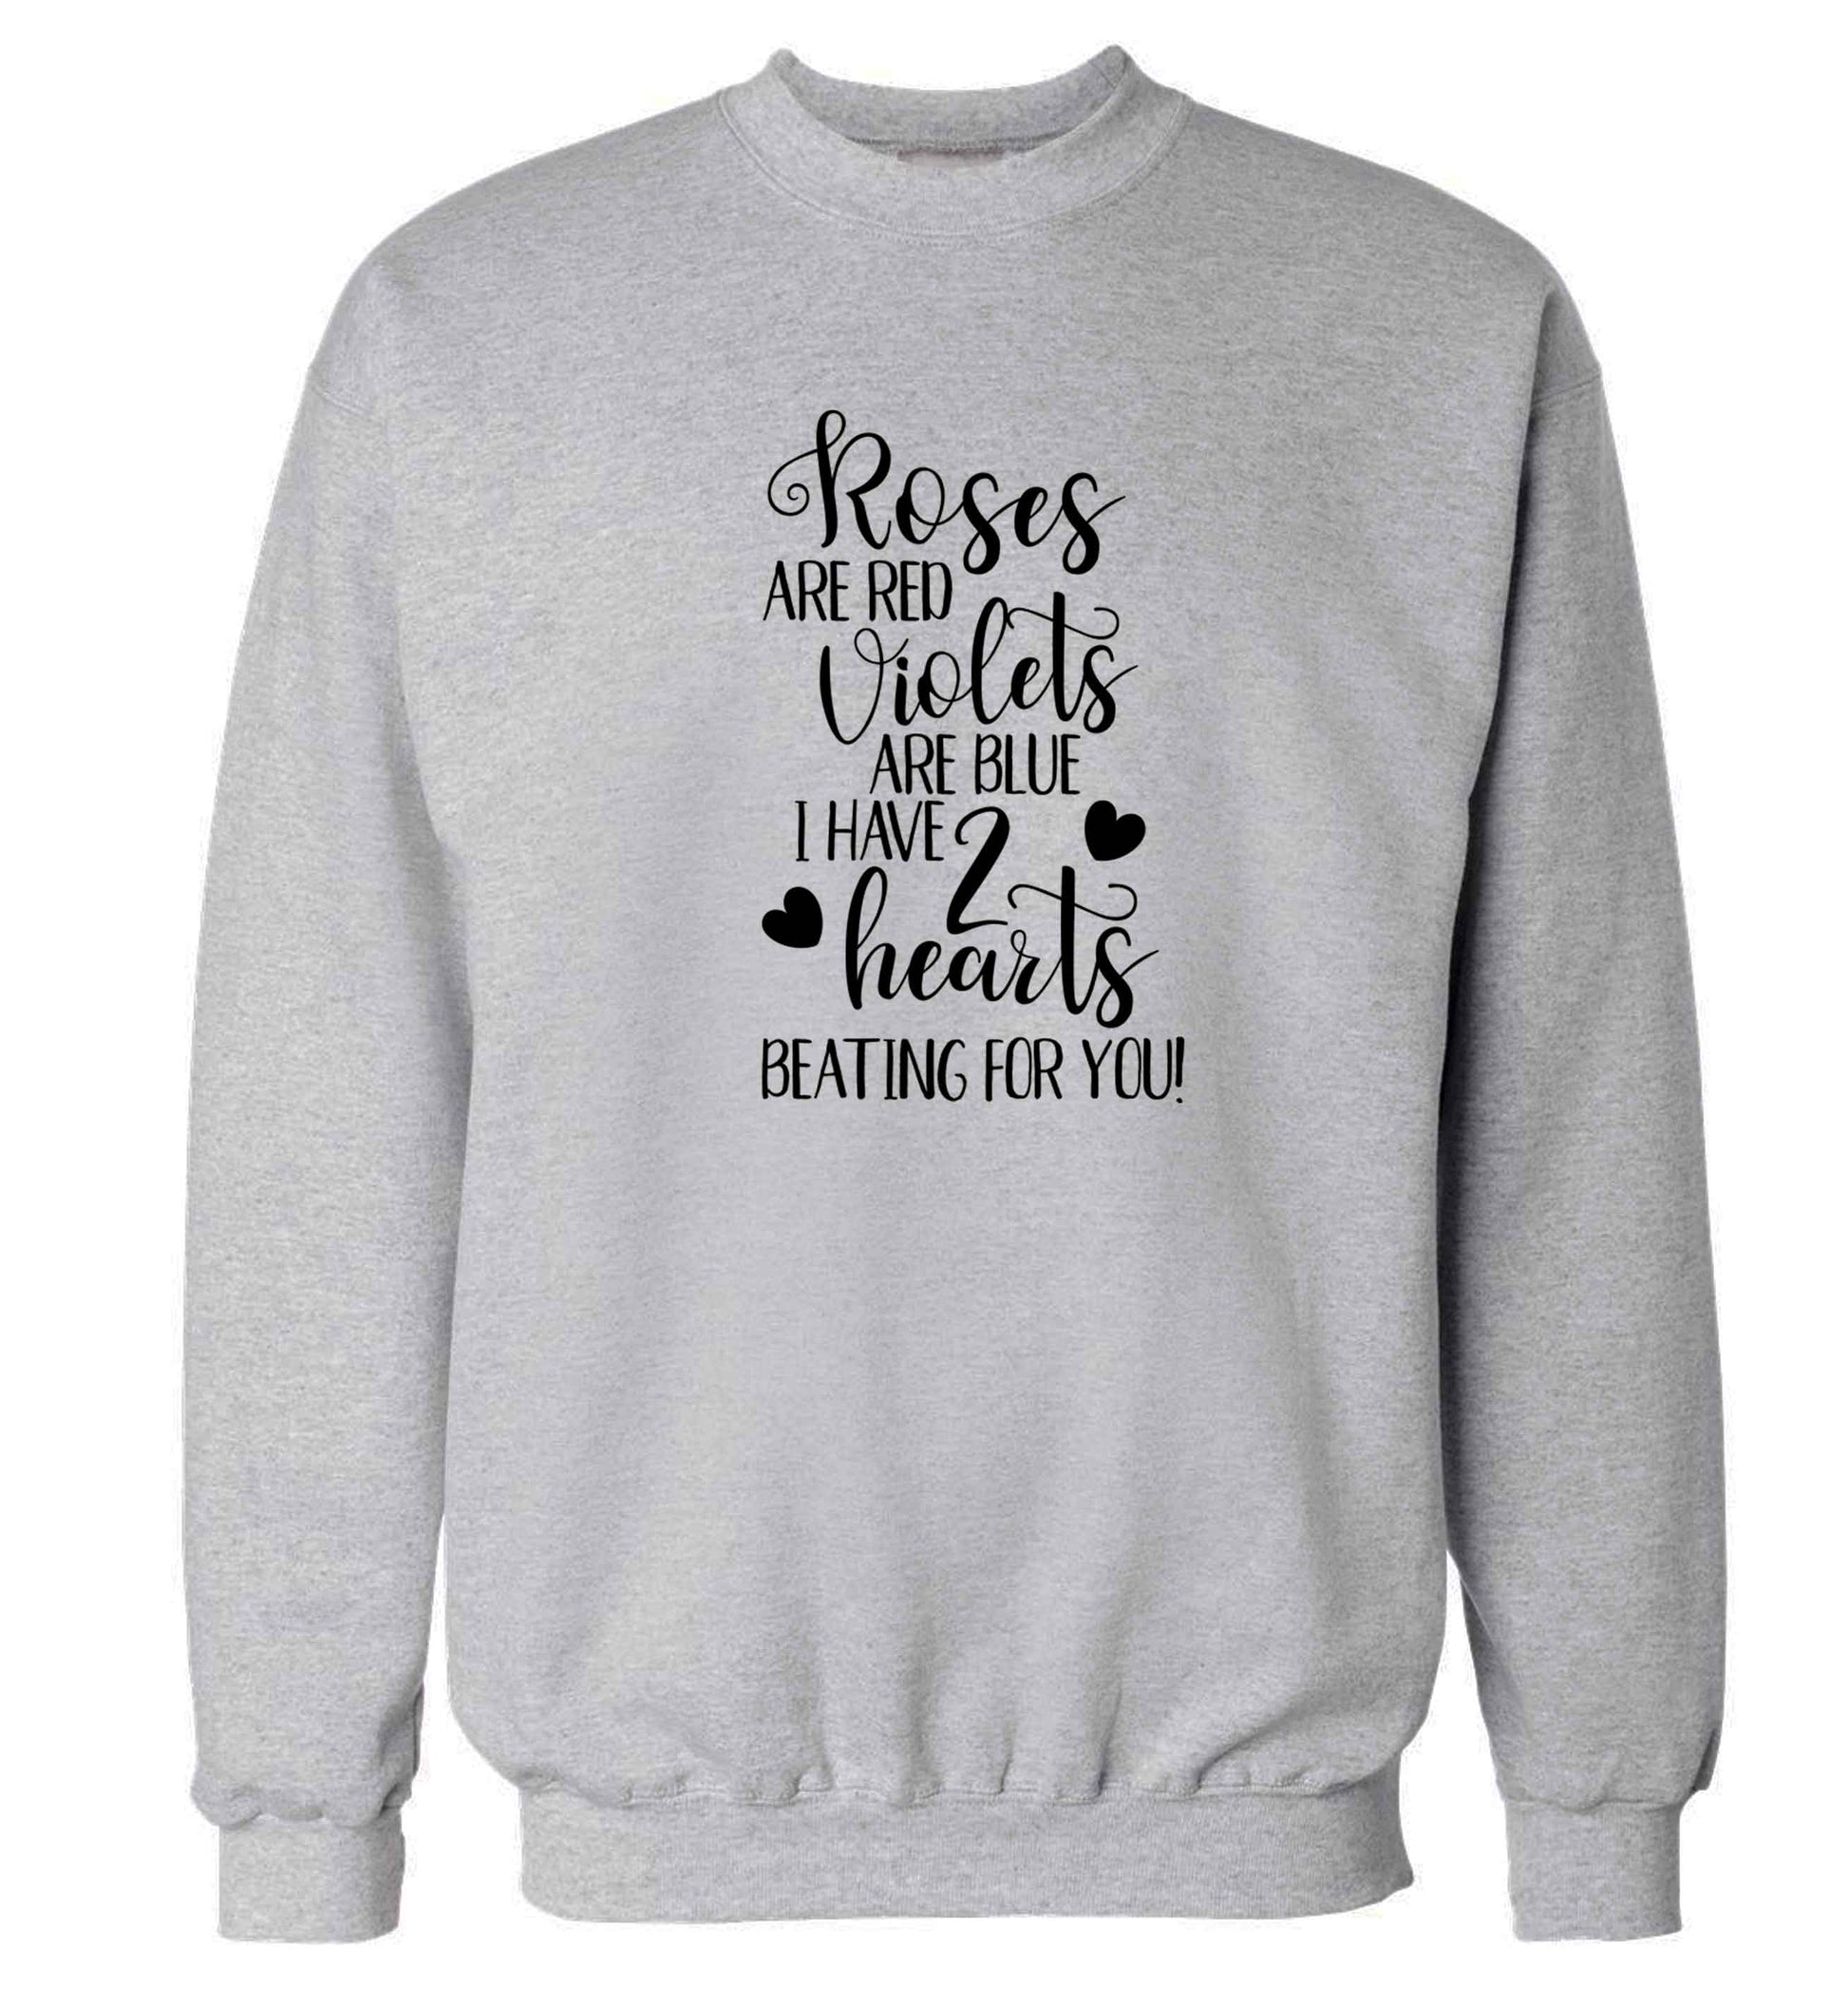 Roses are red violets are blue I have two hearts beating for you Adult's unisex grey Sweater 2XL